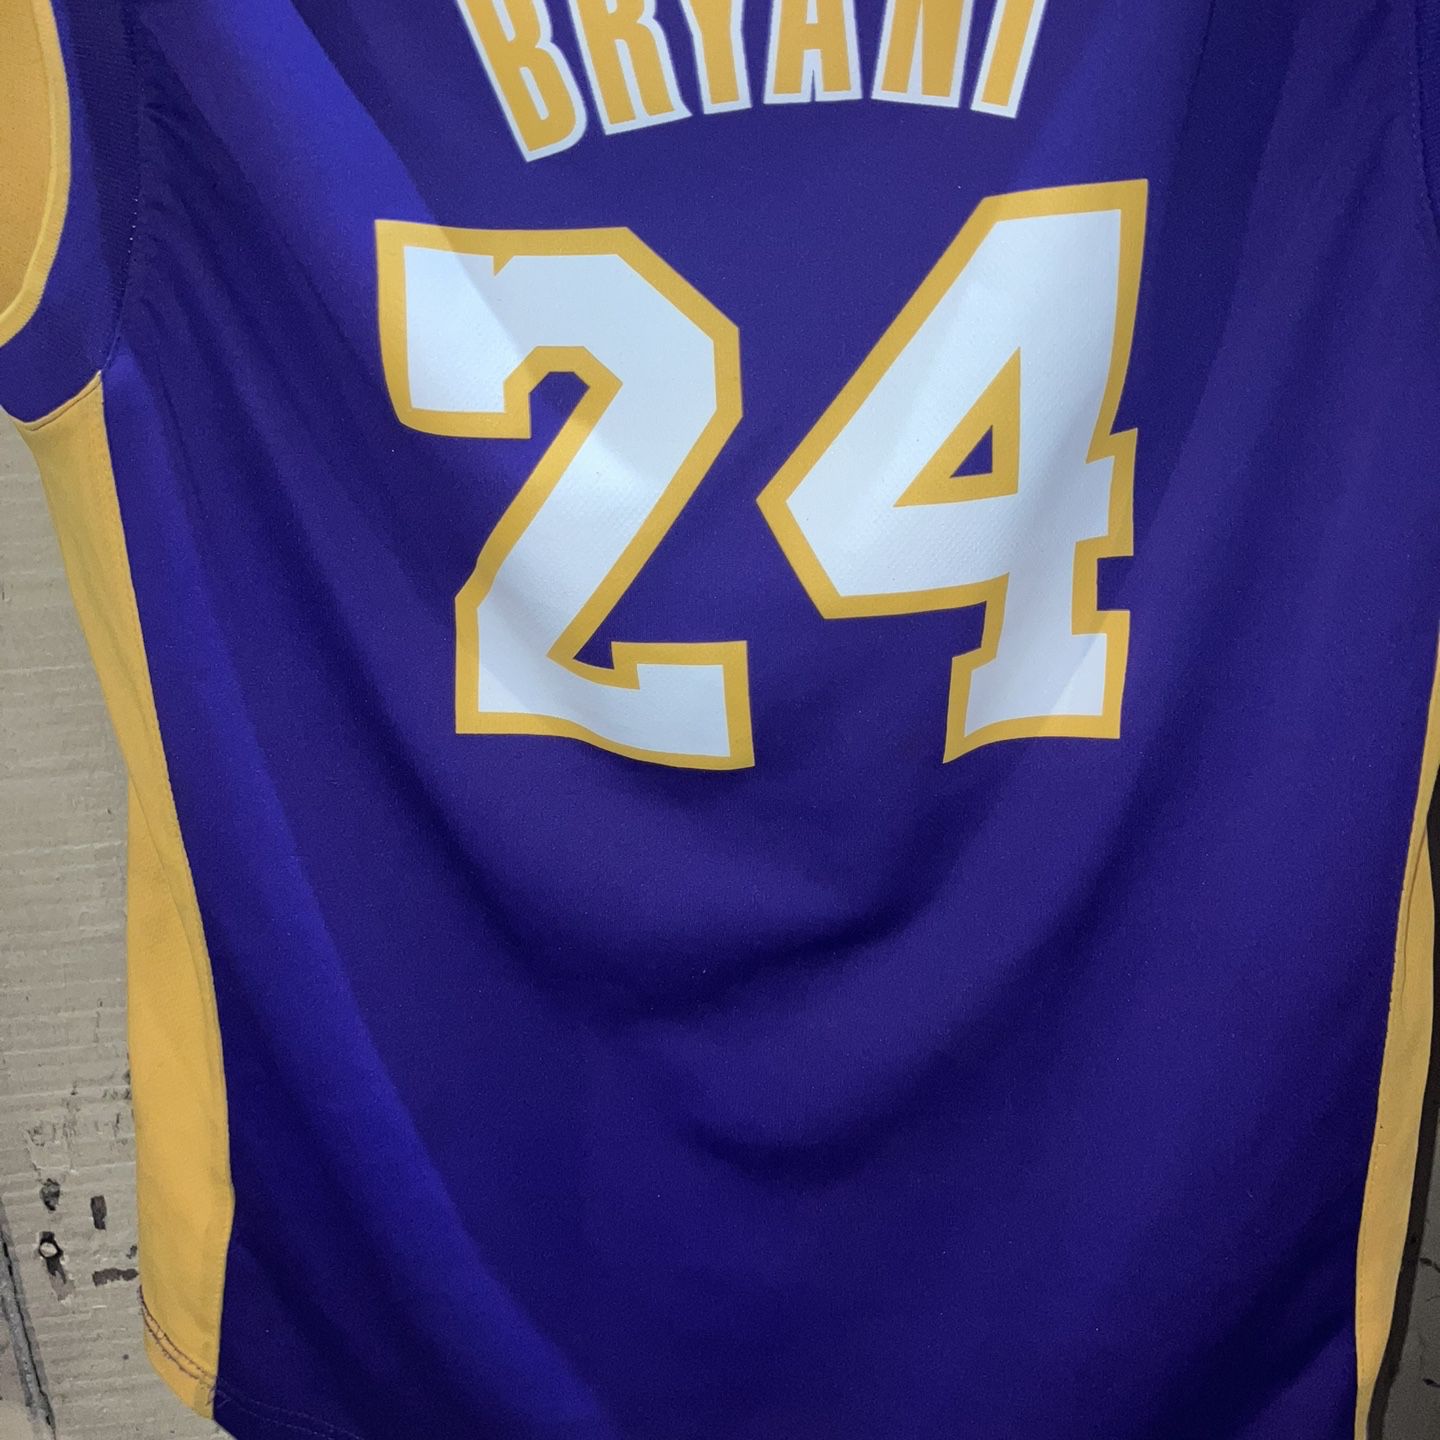 Authentic Kobe Bean Bryant “This is It” Final year Jersey